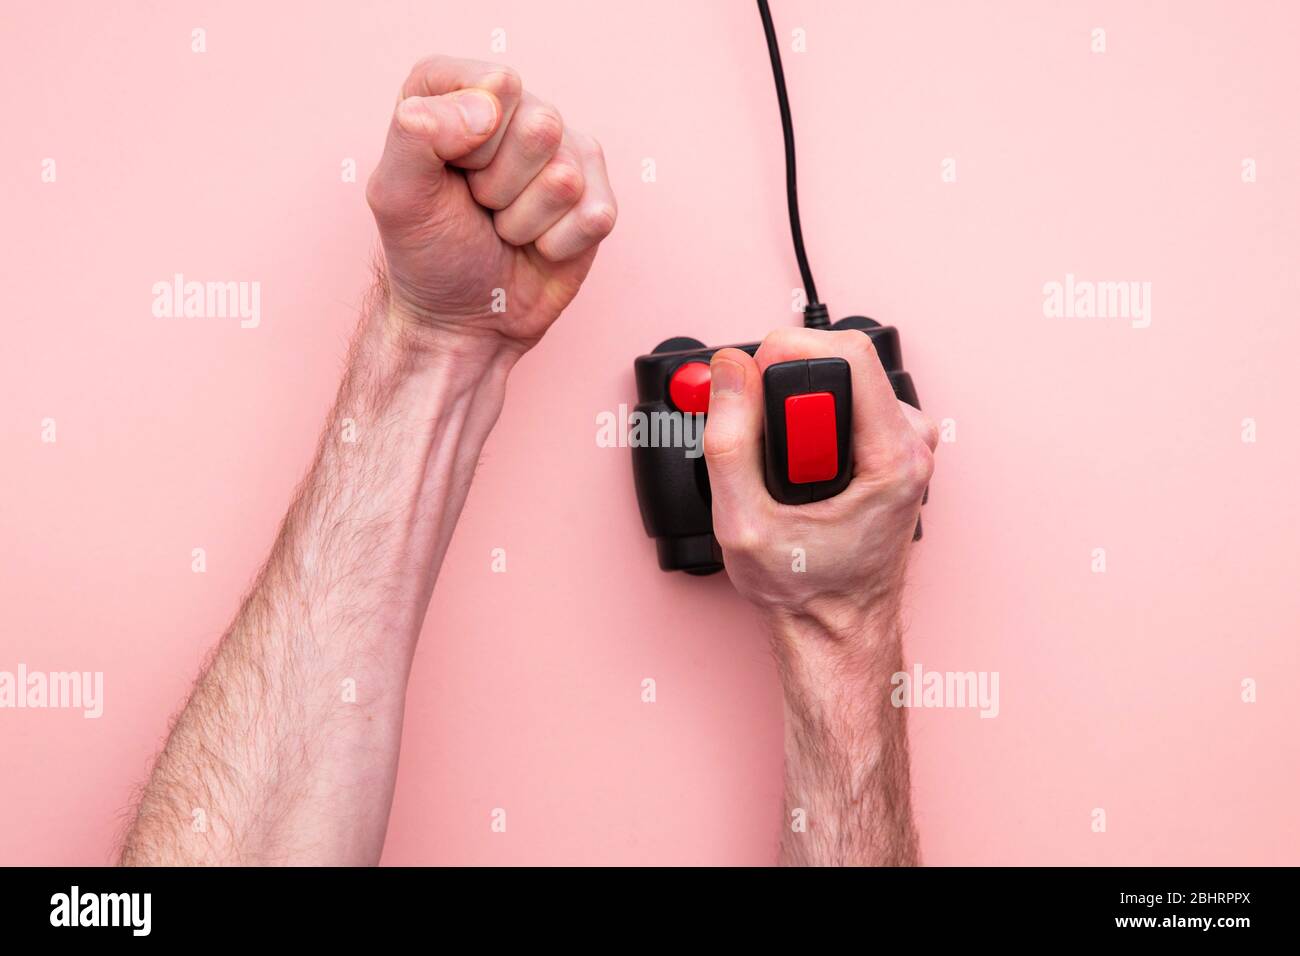 Male hand using retro video game joystick controller. Overhead view Stock Photo